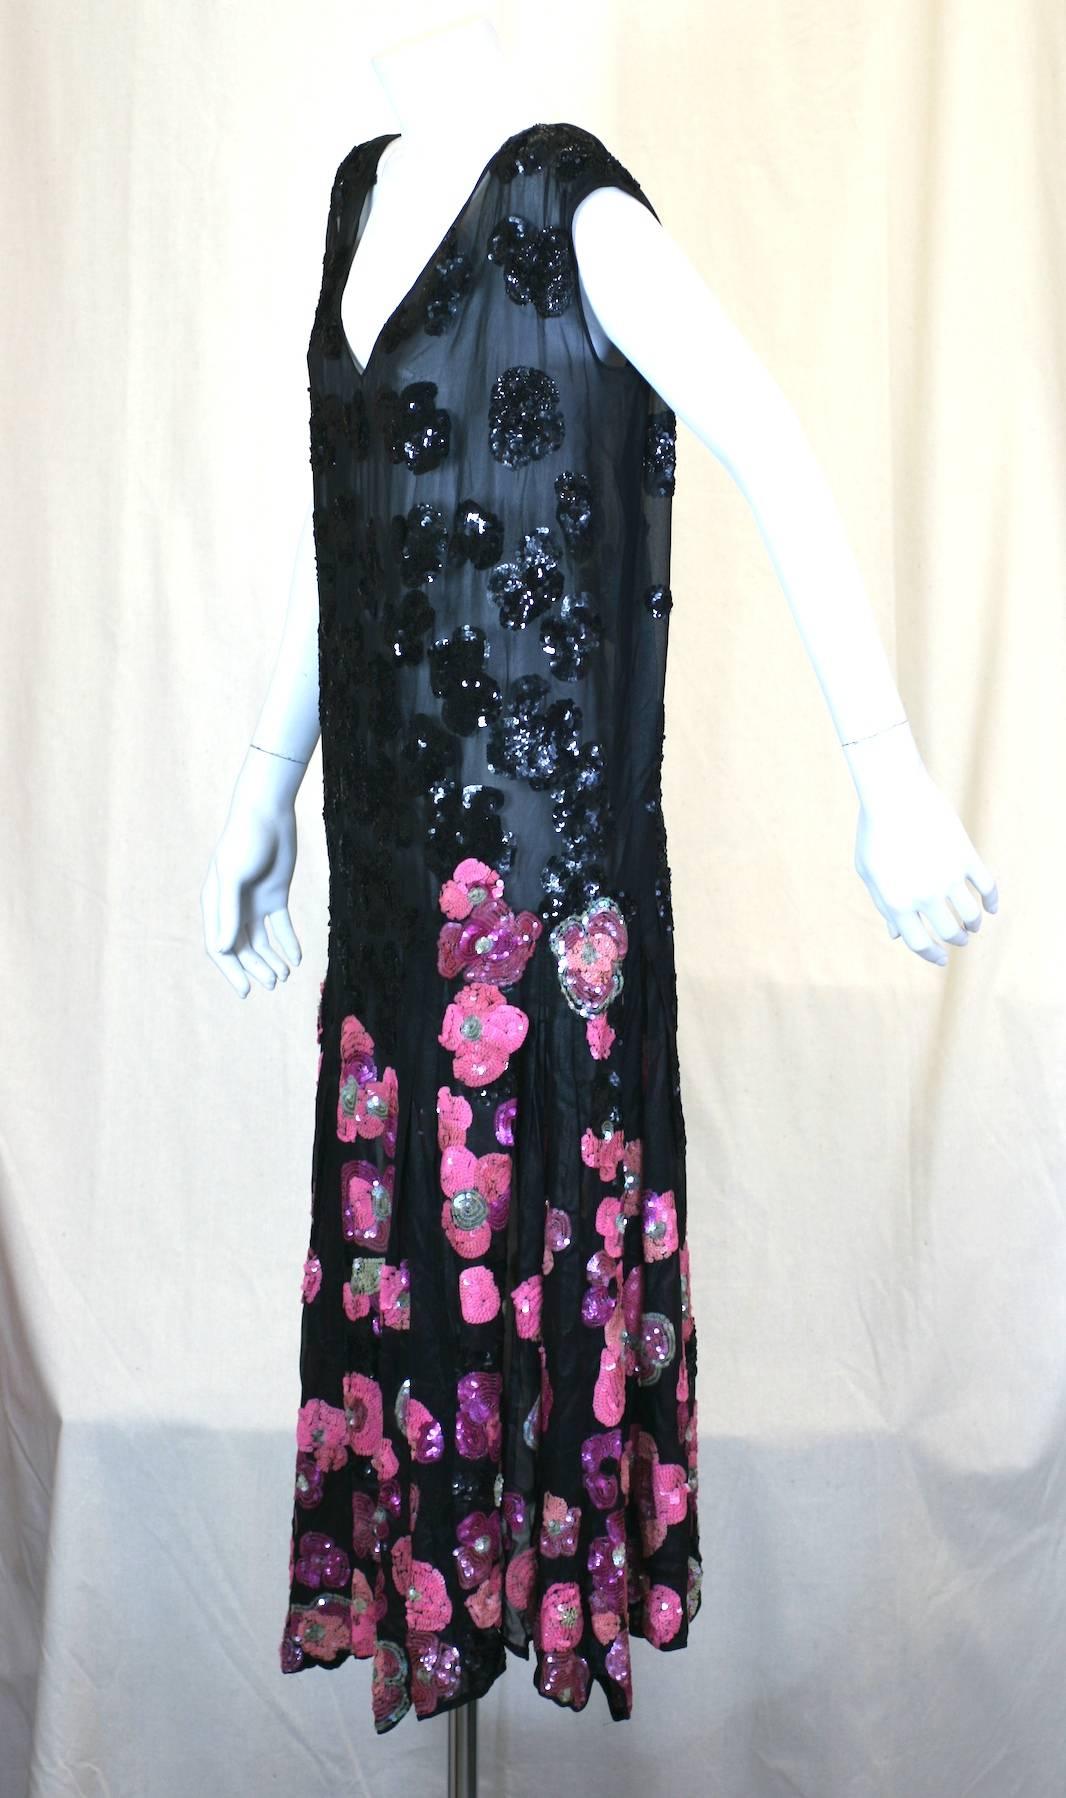 Unusual 1920s French Art Deco flapper evening dress of Couture Quality. Luminiscent black laquered silk organza-chiffon, hand applied with paillette  embroidery of abstract poppy flower heads in black, pink, purples, accented with silver seafoam